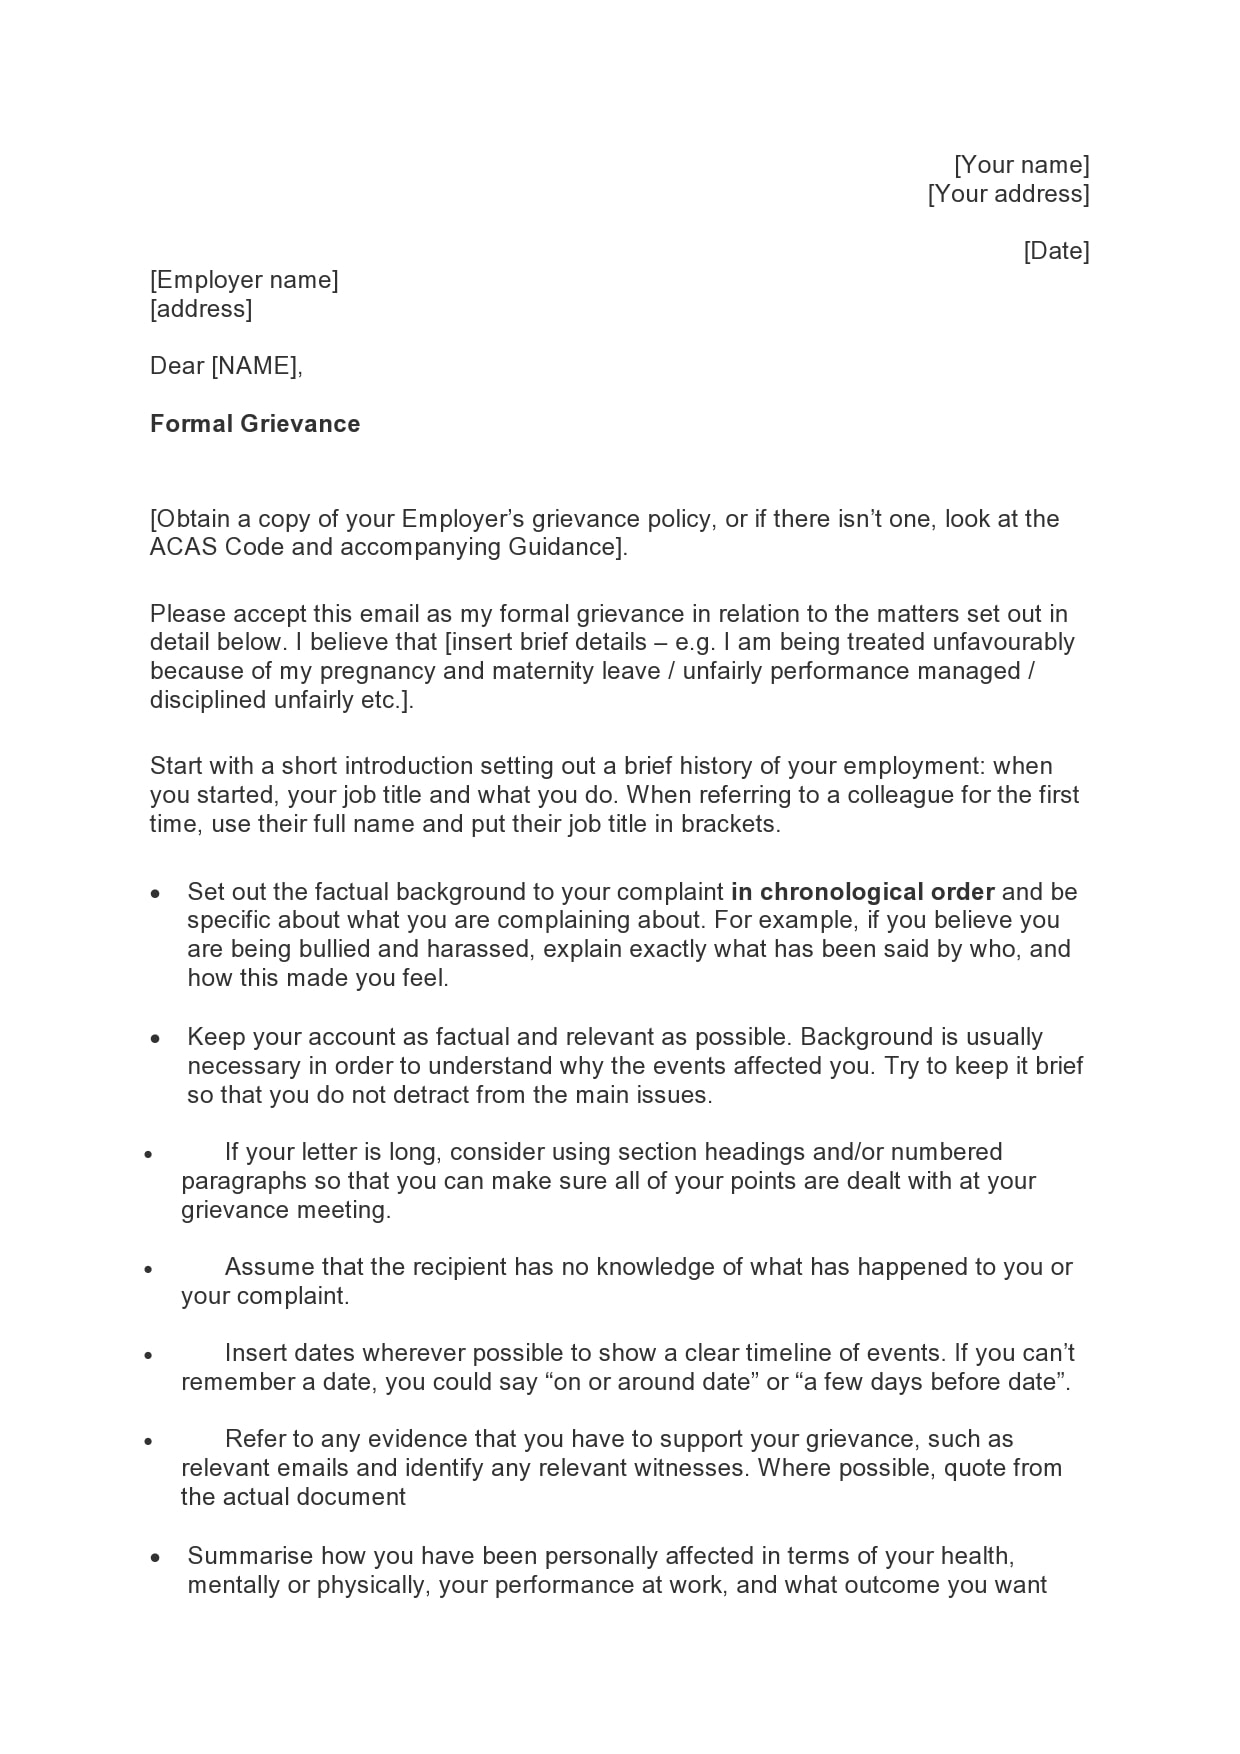 22 Formal Grievance Letter Templates (+Examples) Pertaining To Grievance Template Letters